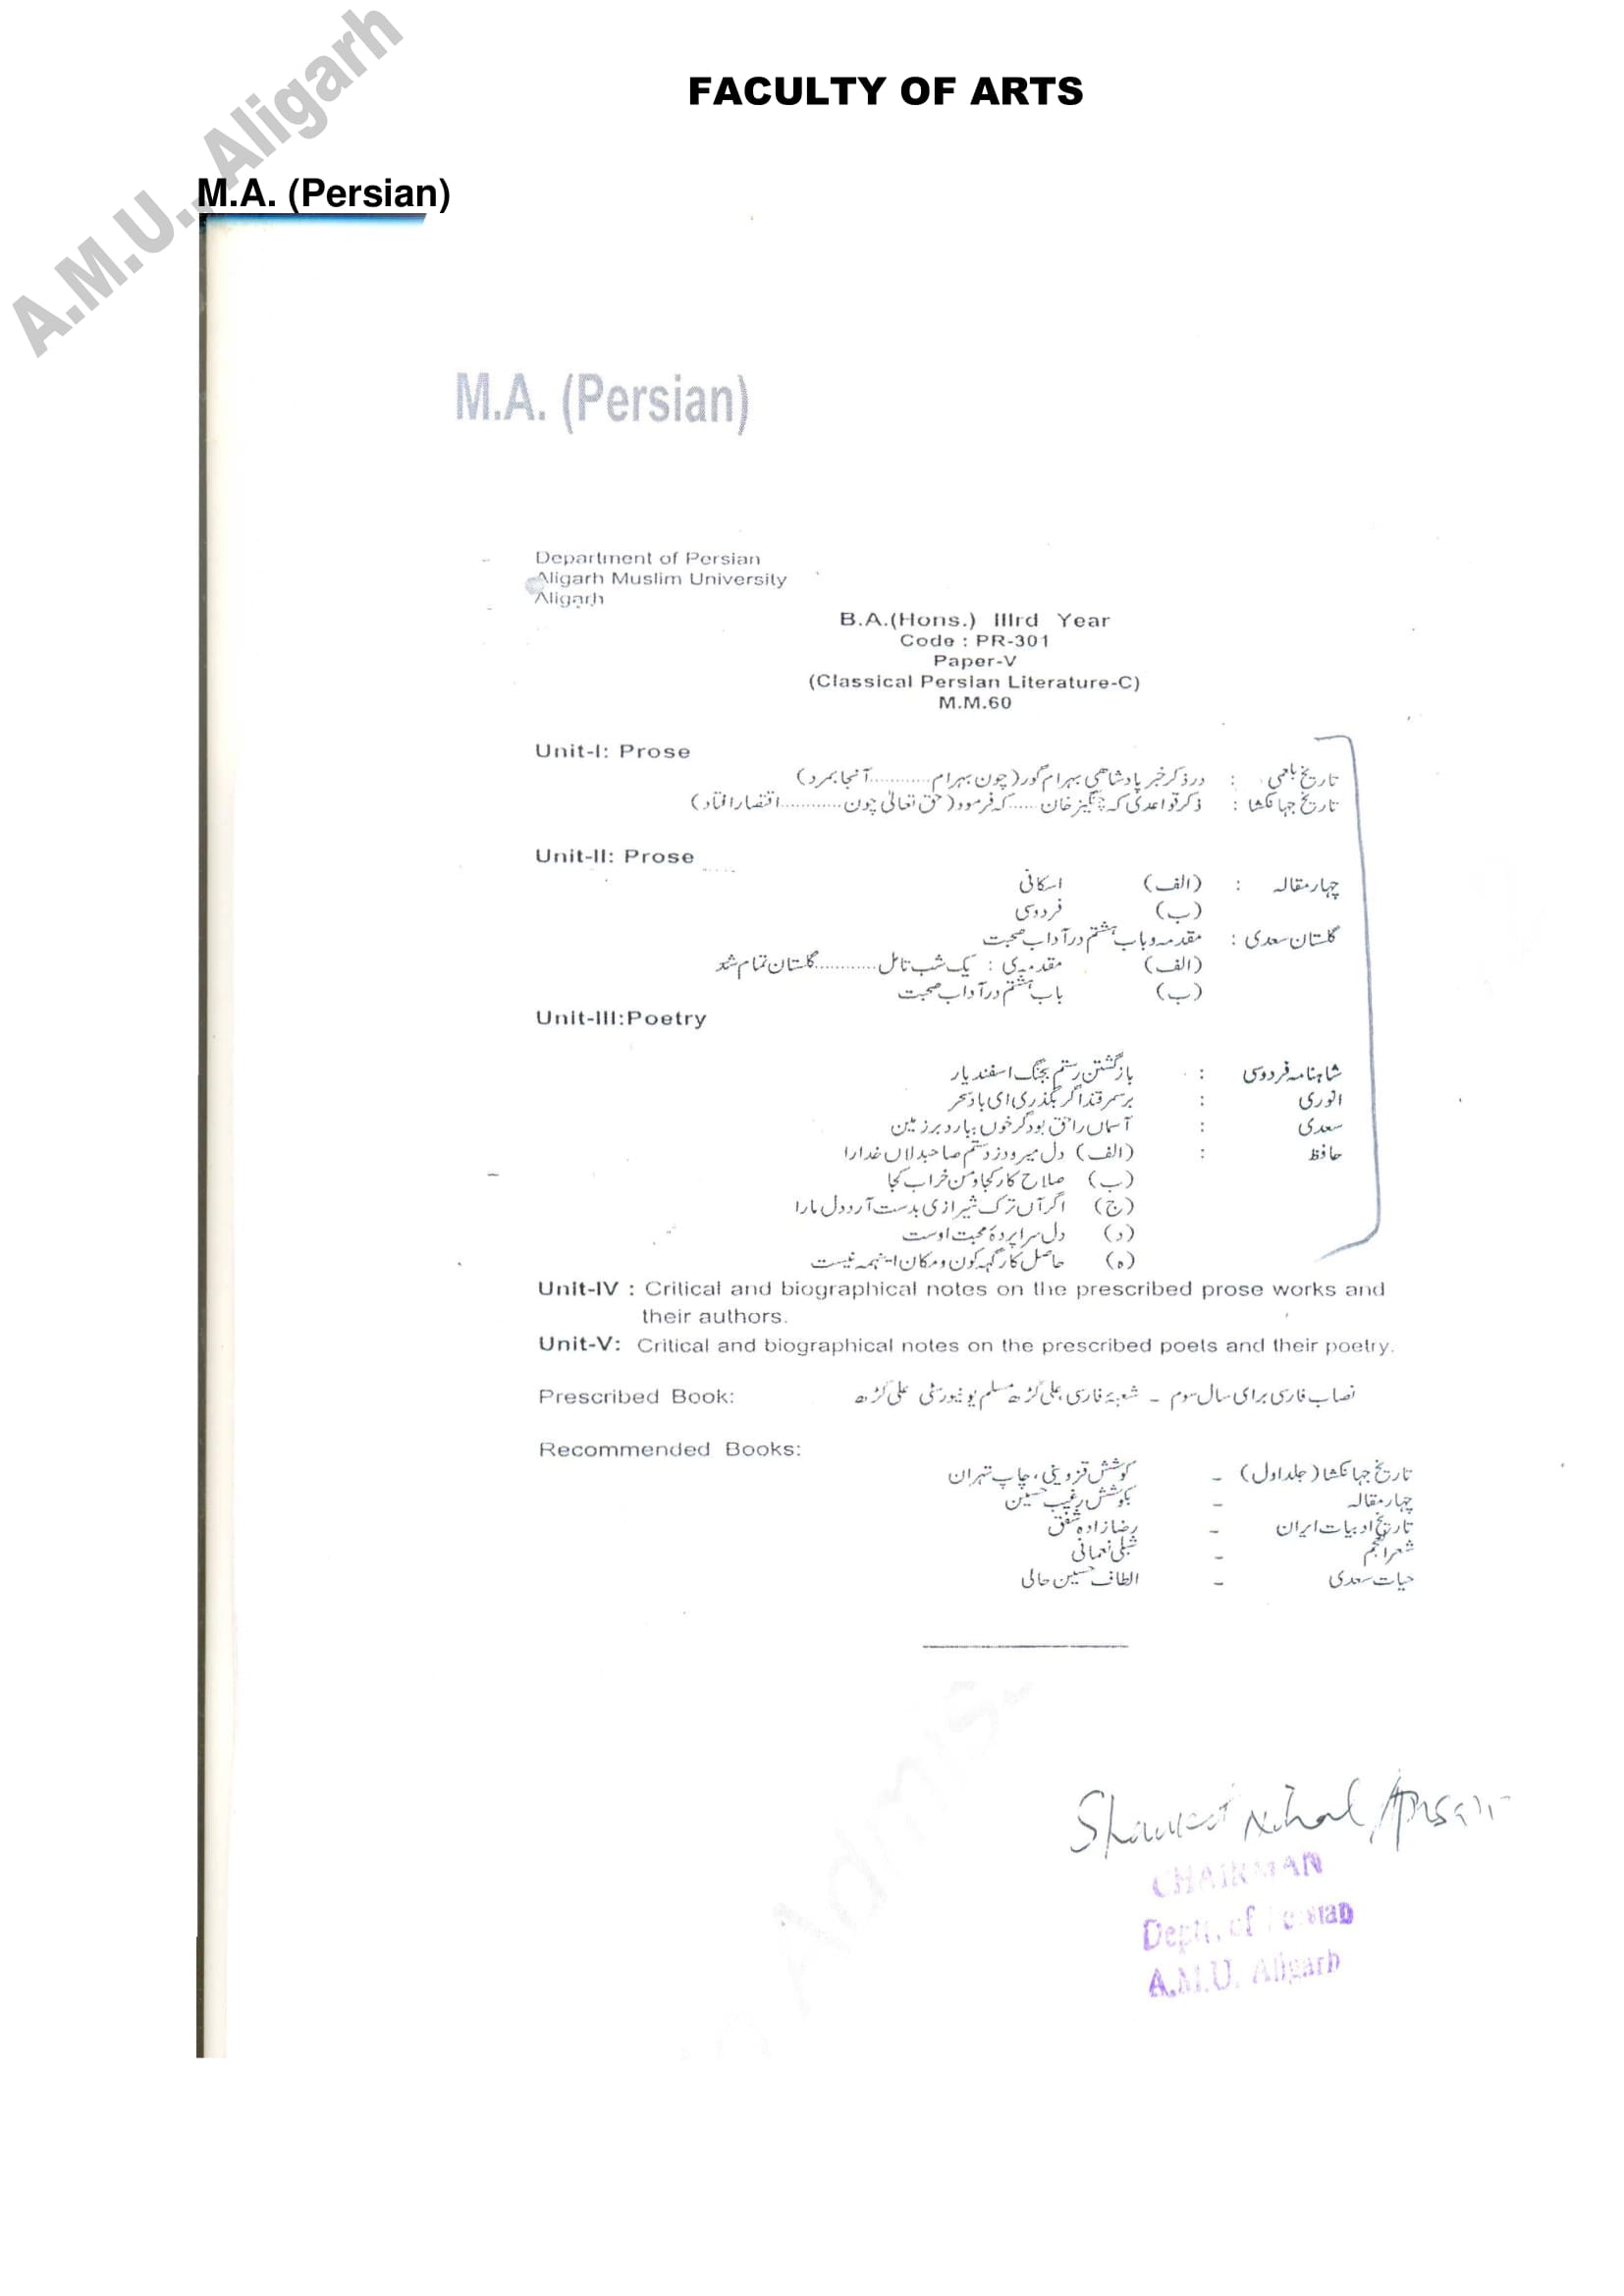 AMU Entrance Exam Syllabus for M.A. in Persian - Page 1